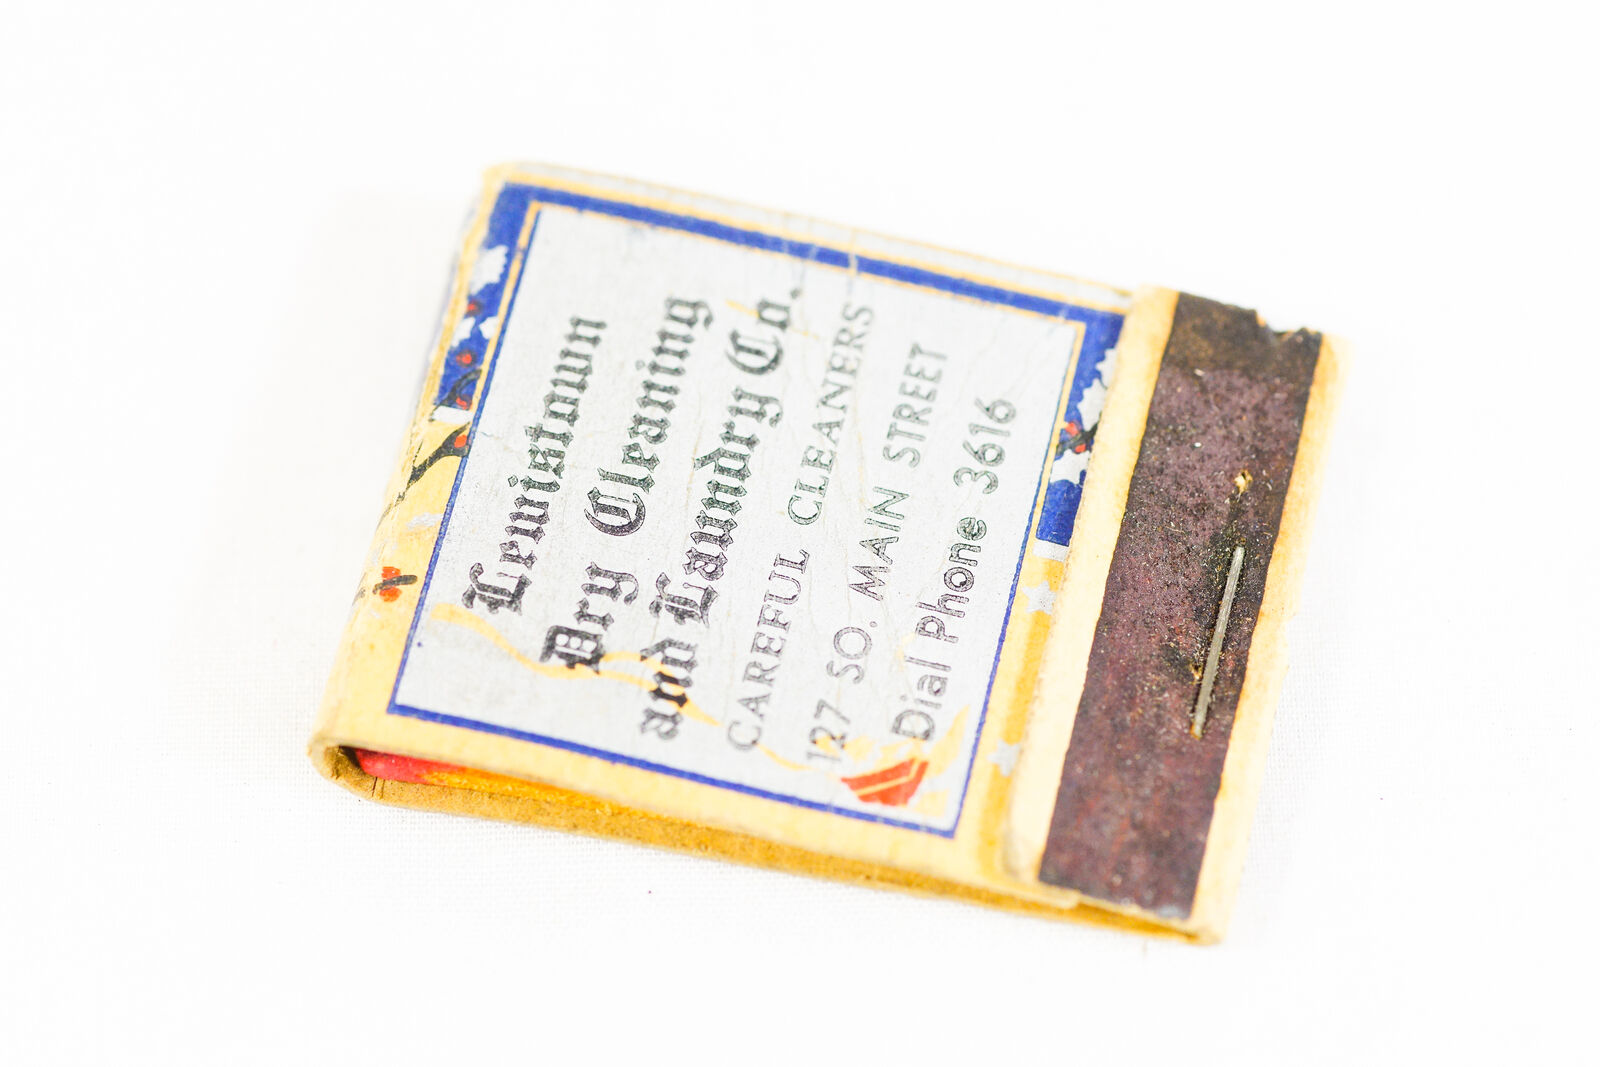 Lewistown Dry Cleaning Season Greetings 1950s Unstruck Matchbook Cover